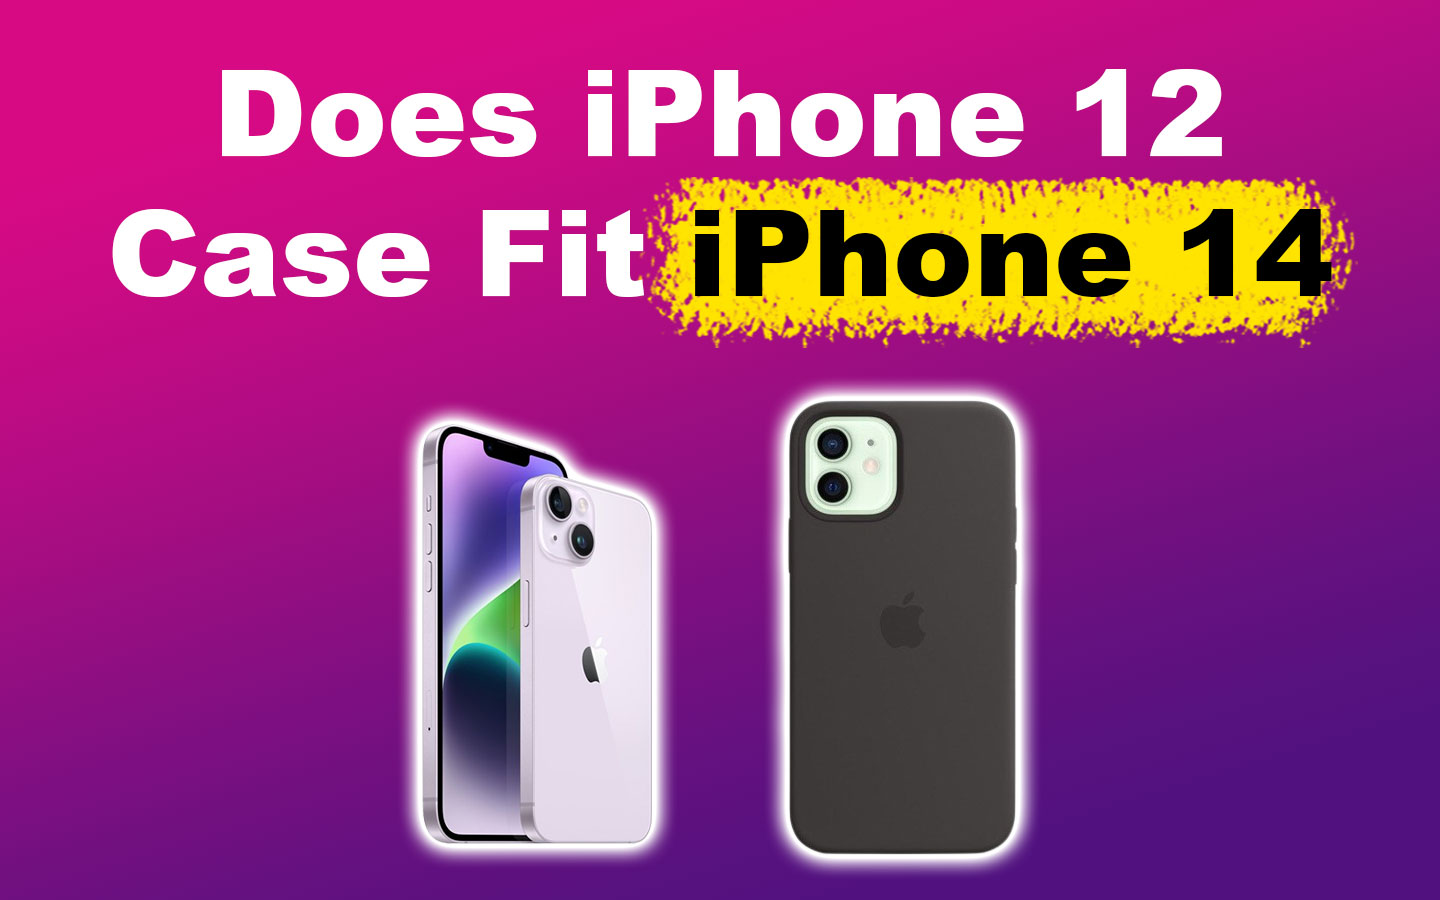 Does iPhone 12 Case Fit iPhone 14